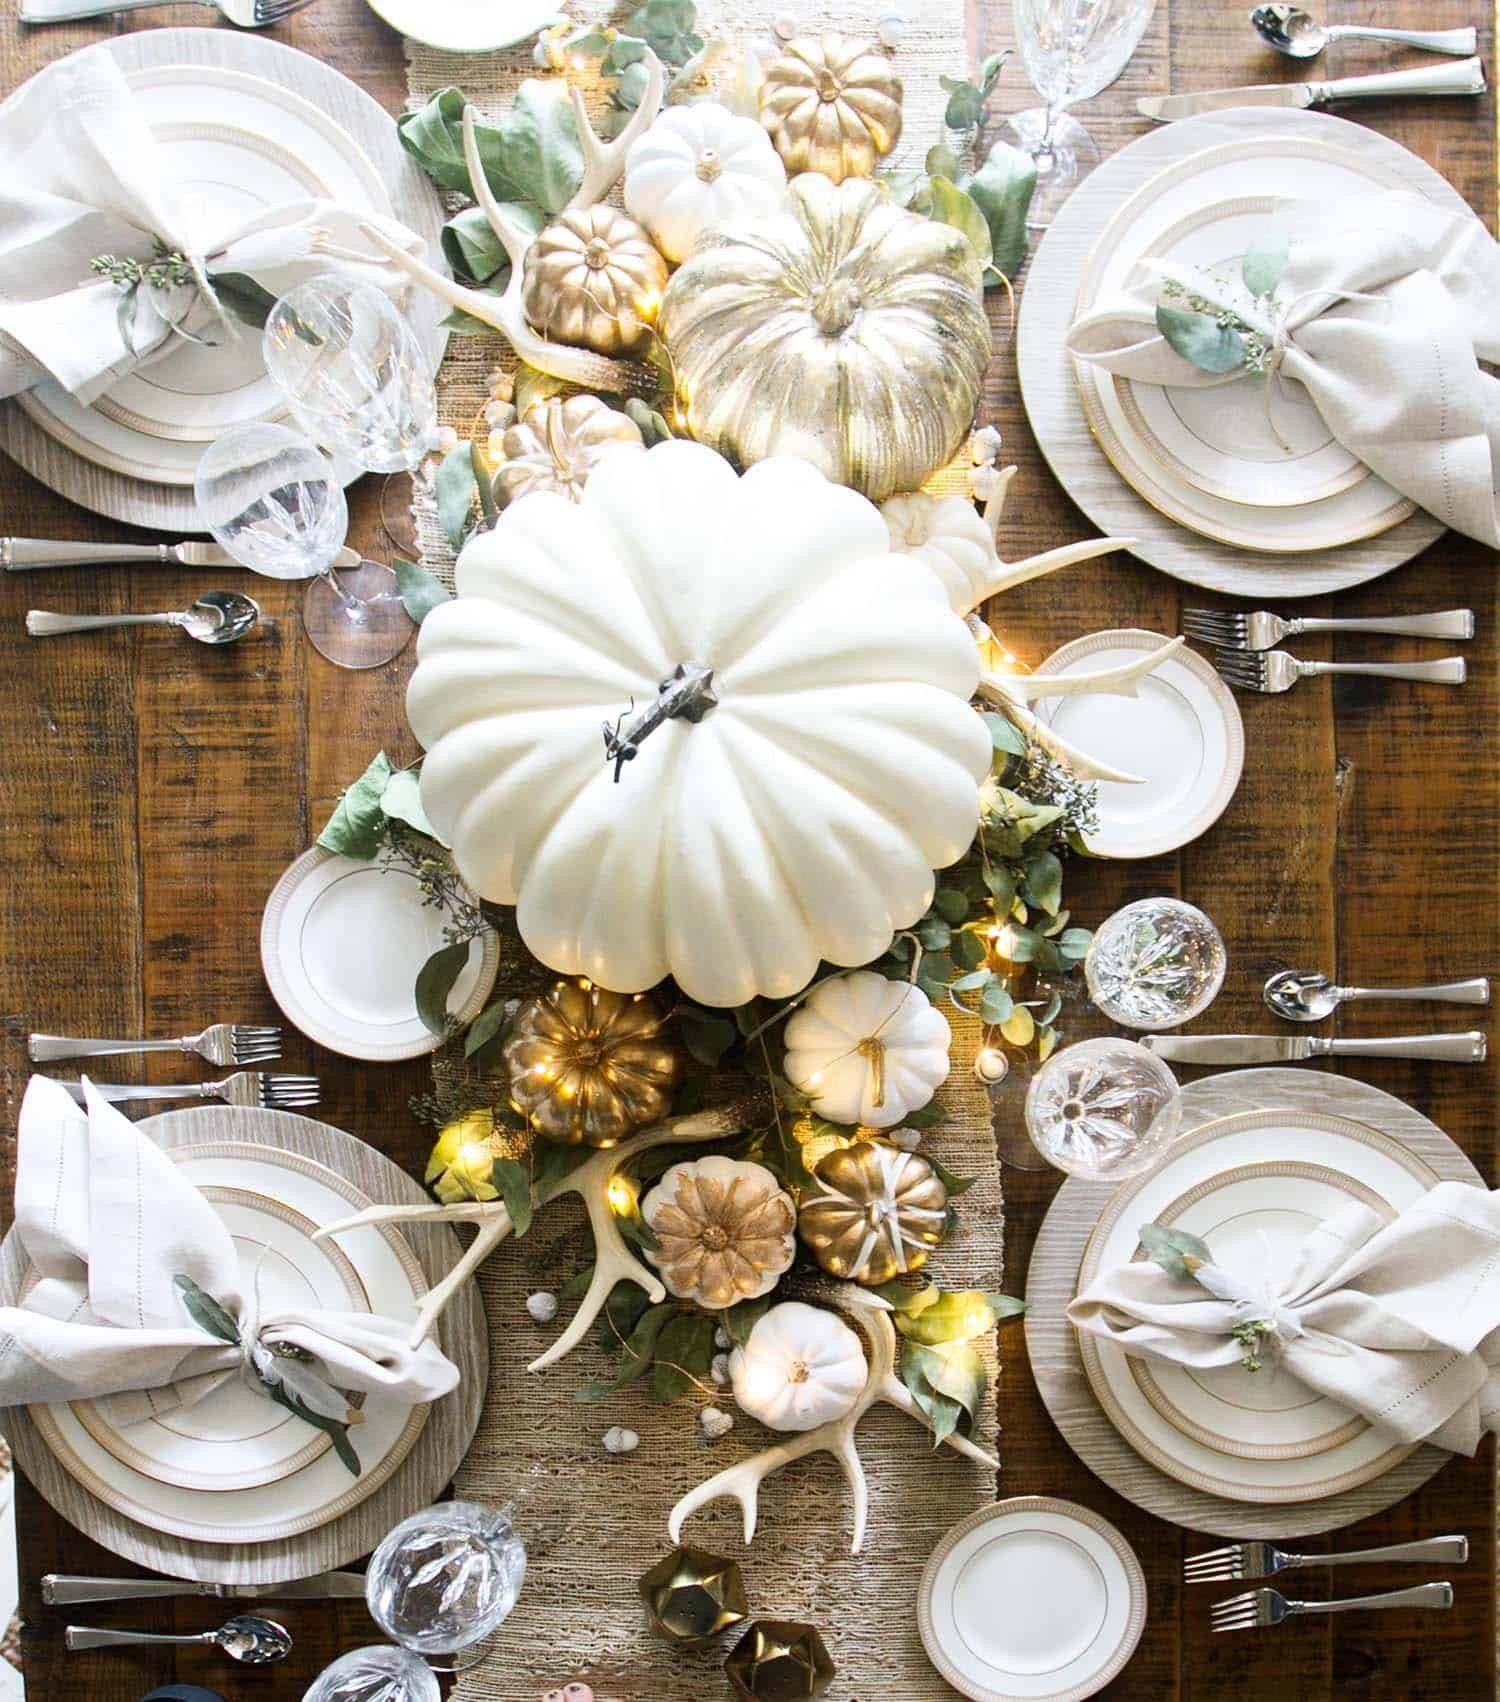 Simple Thanksgiving Table Decorations
 25 Beautiful And Elegant Centerpiece Ideas For A